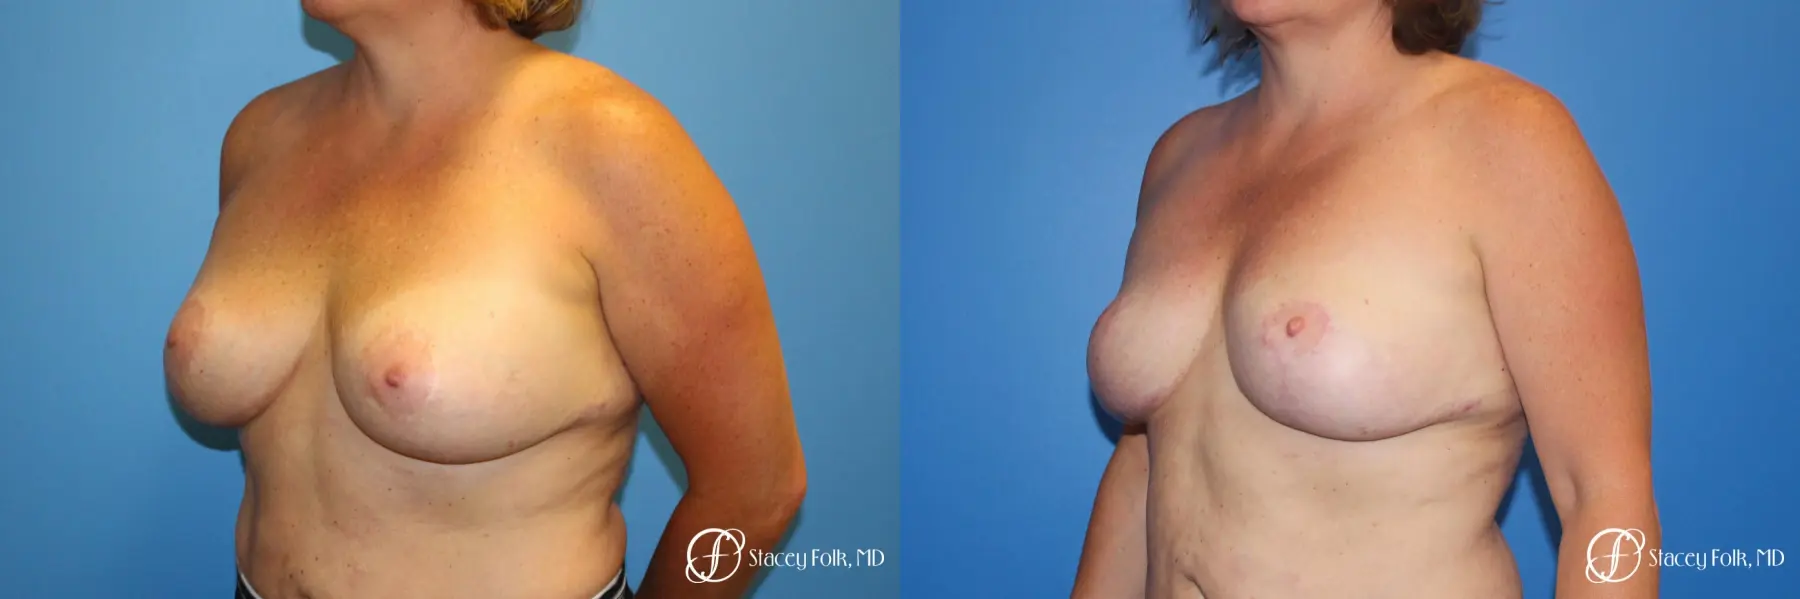 Breast Revision - Removal of Implant, Fat Transfer, Breast Lift (Mastopexy) - Before and After 2